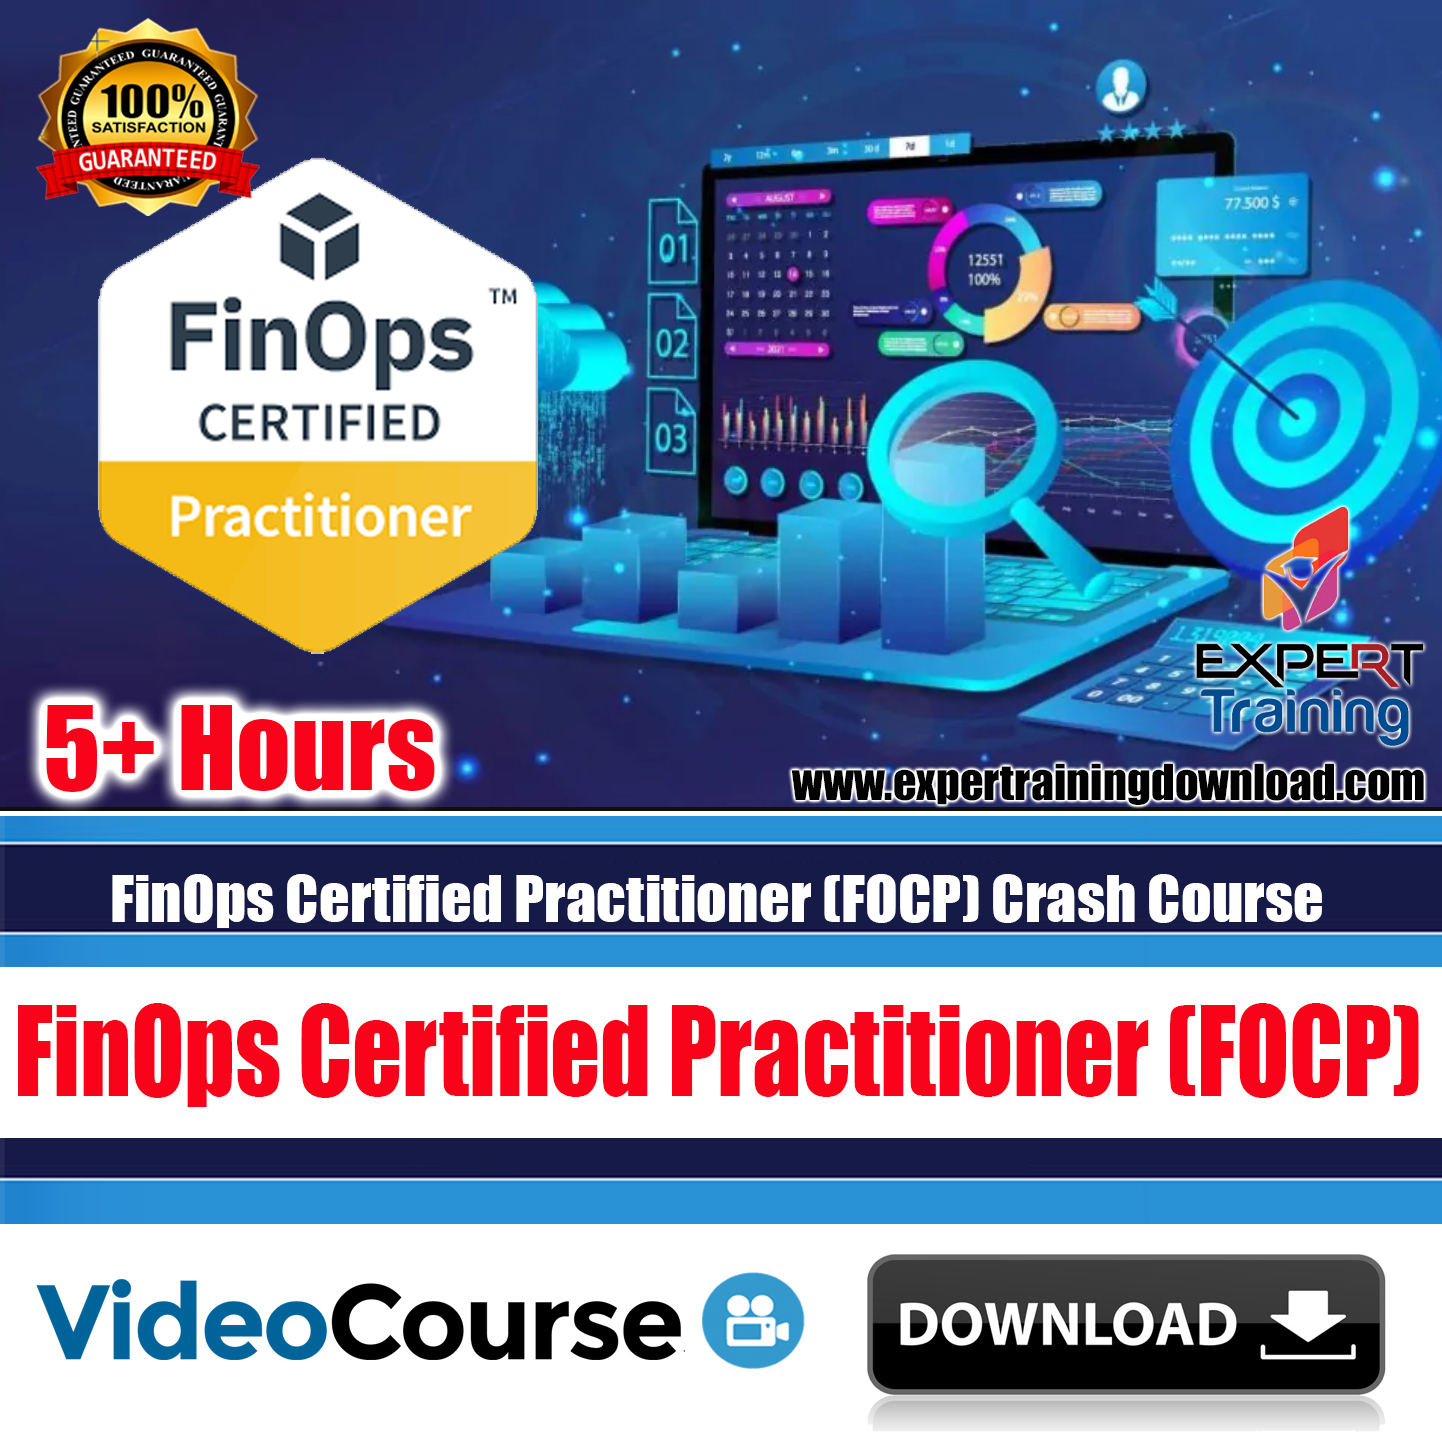 FinOps Certified Practitioner (FOCP) Crash Course